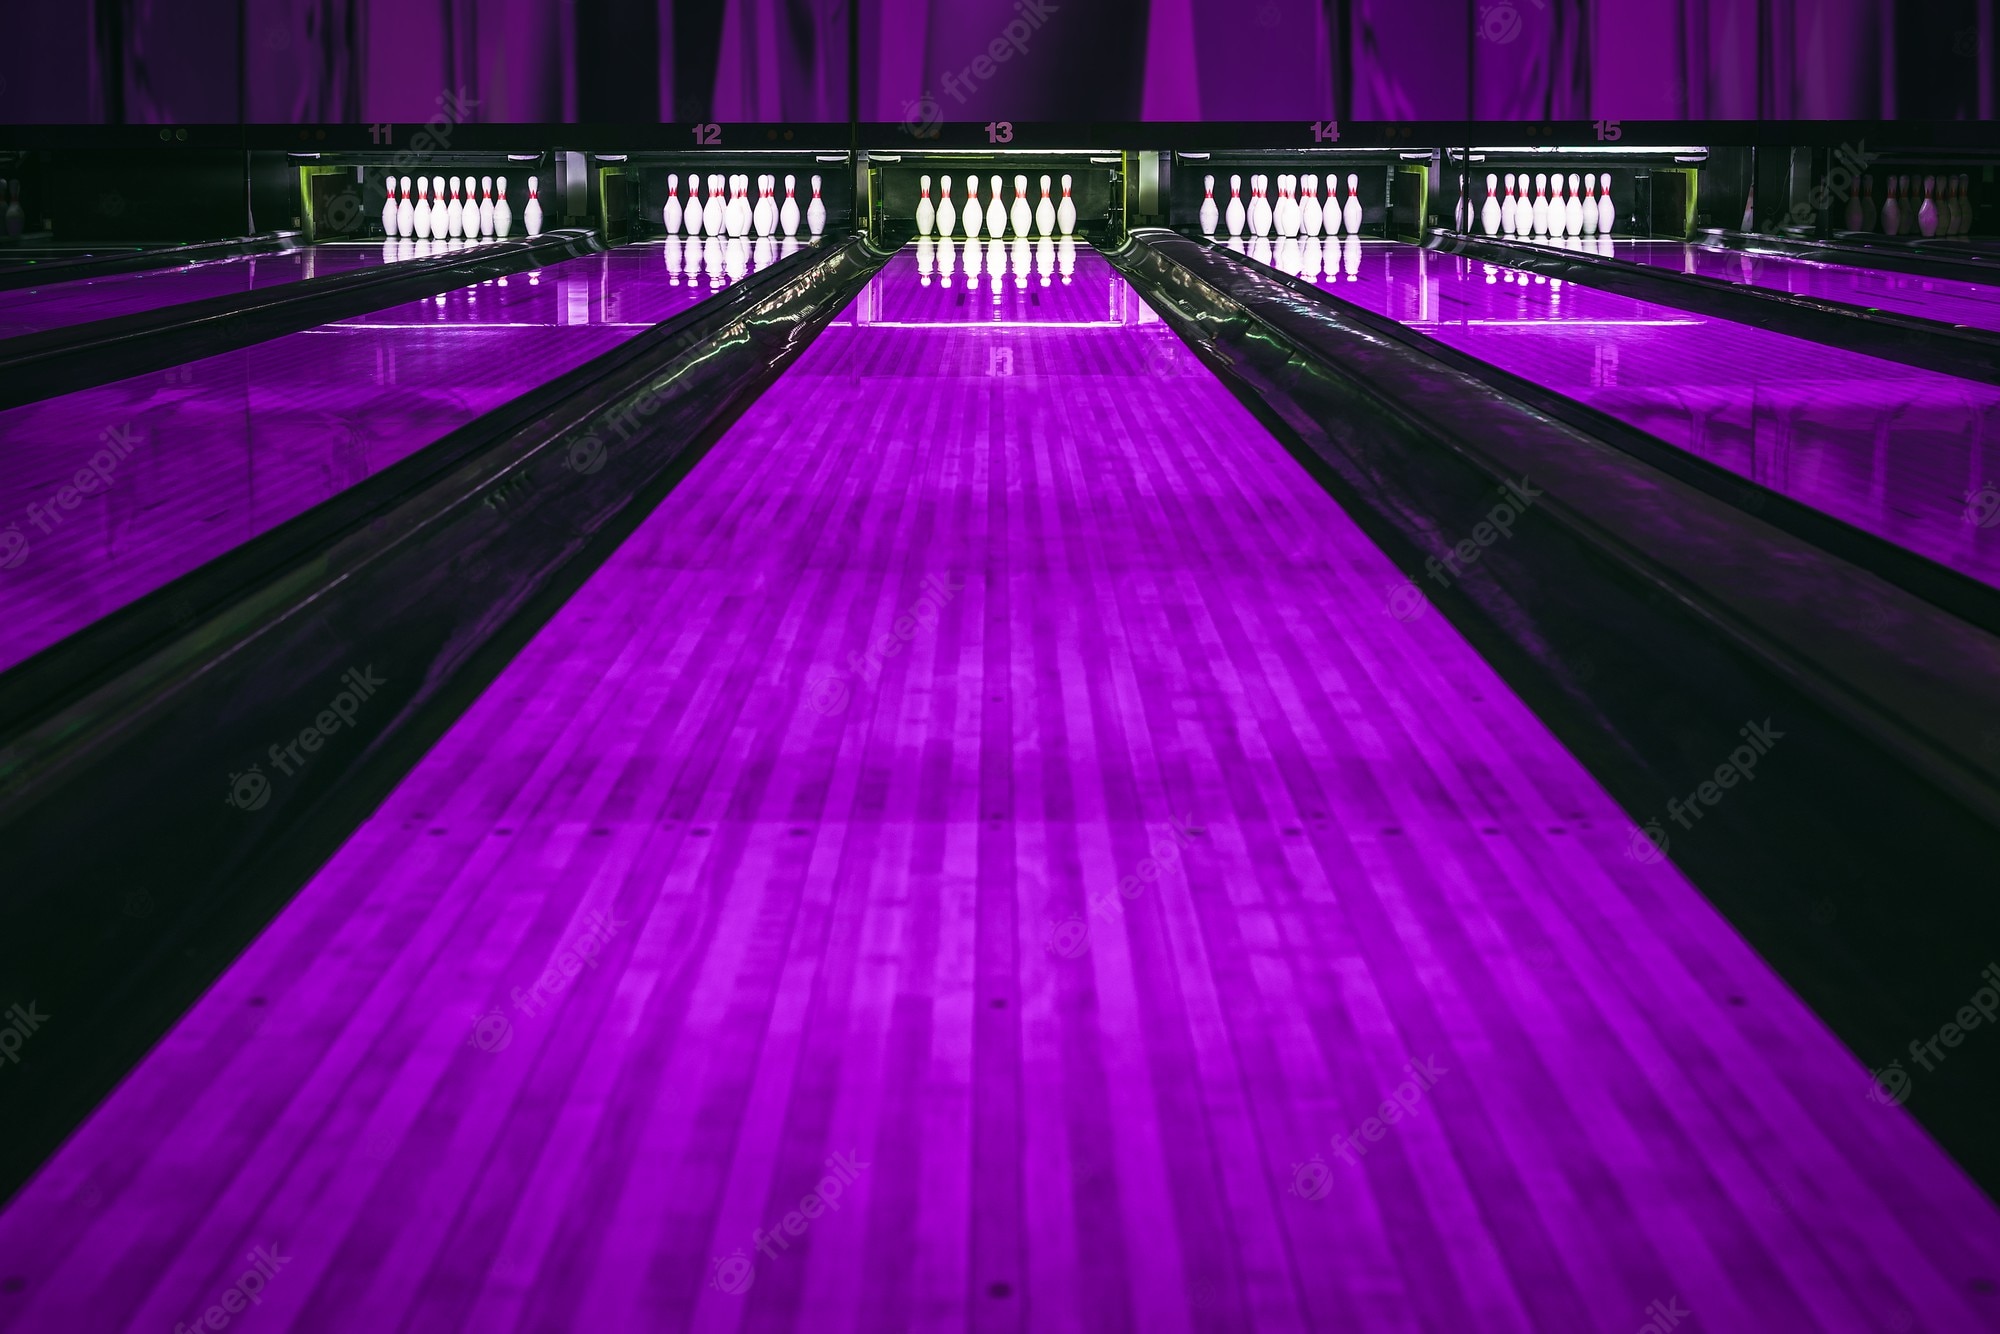 Bowling Alley Image. Free Vectors, & PSD